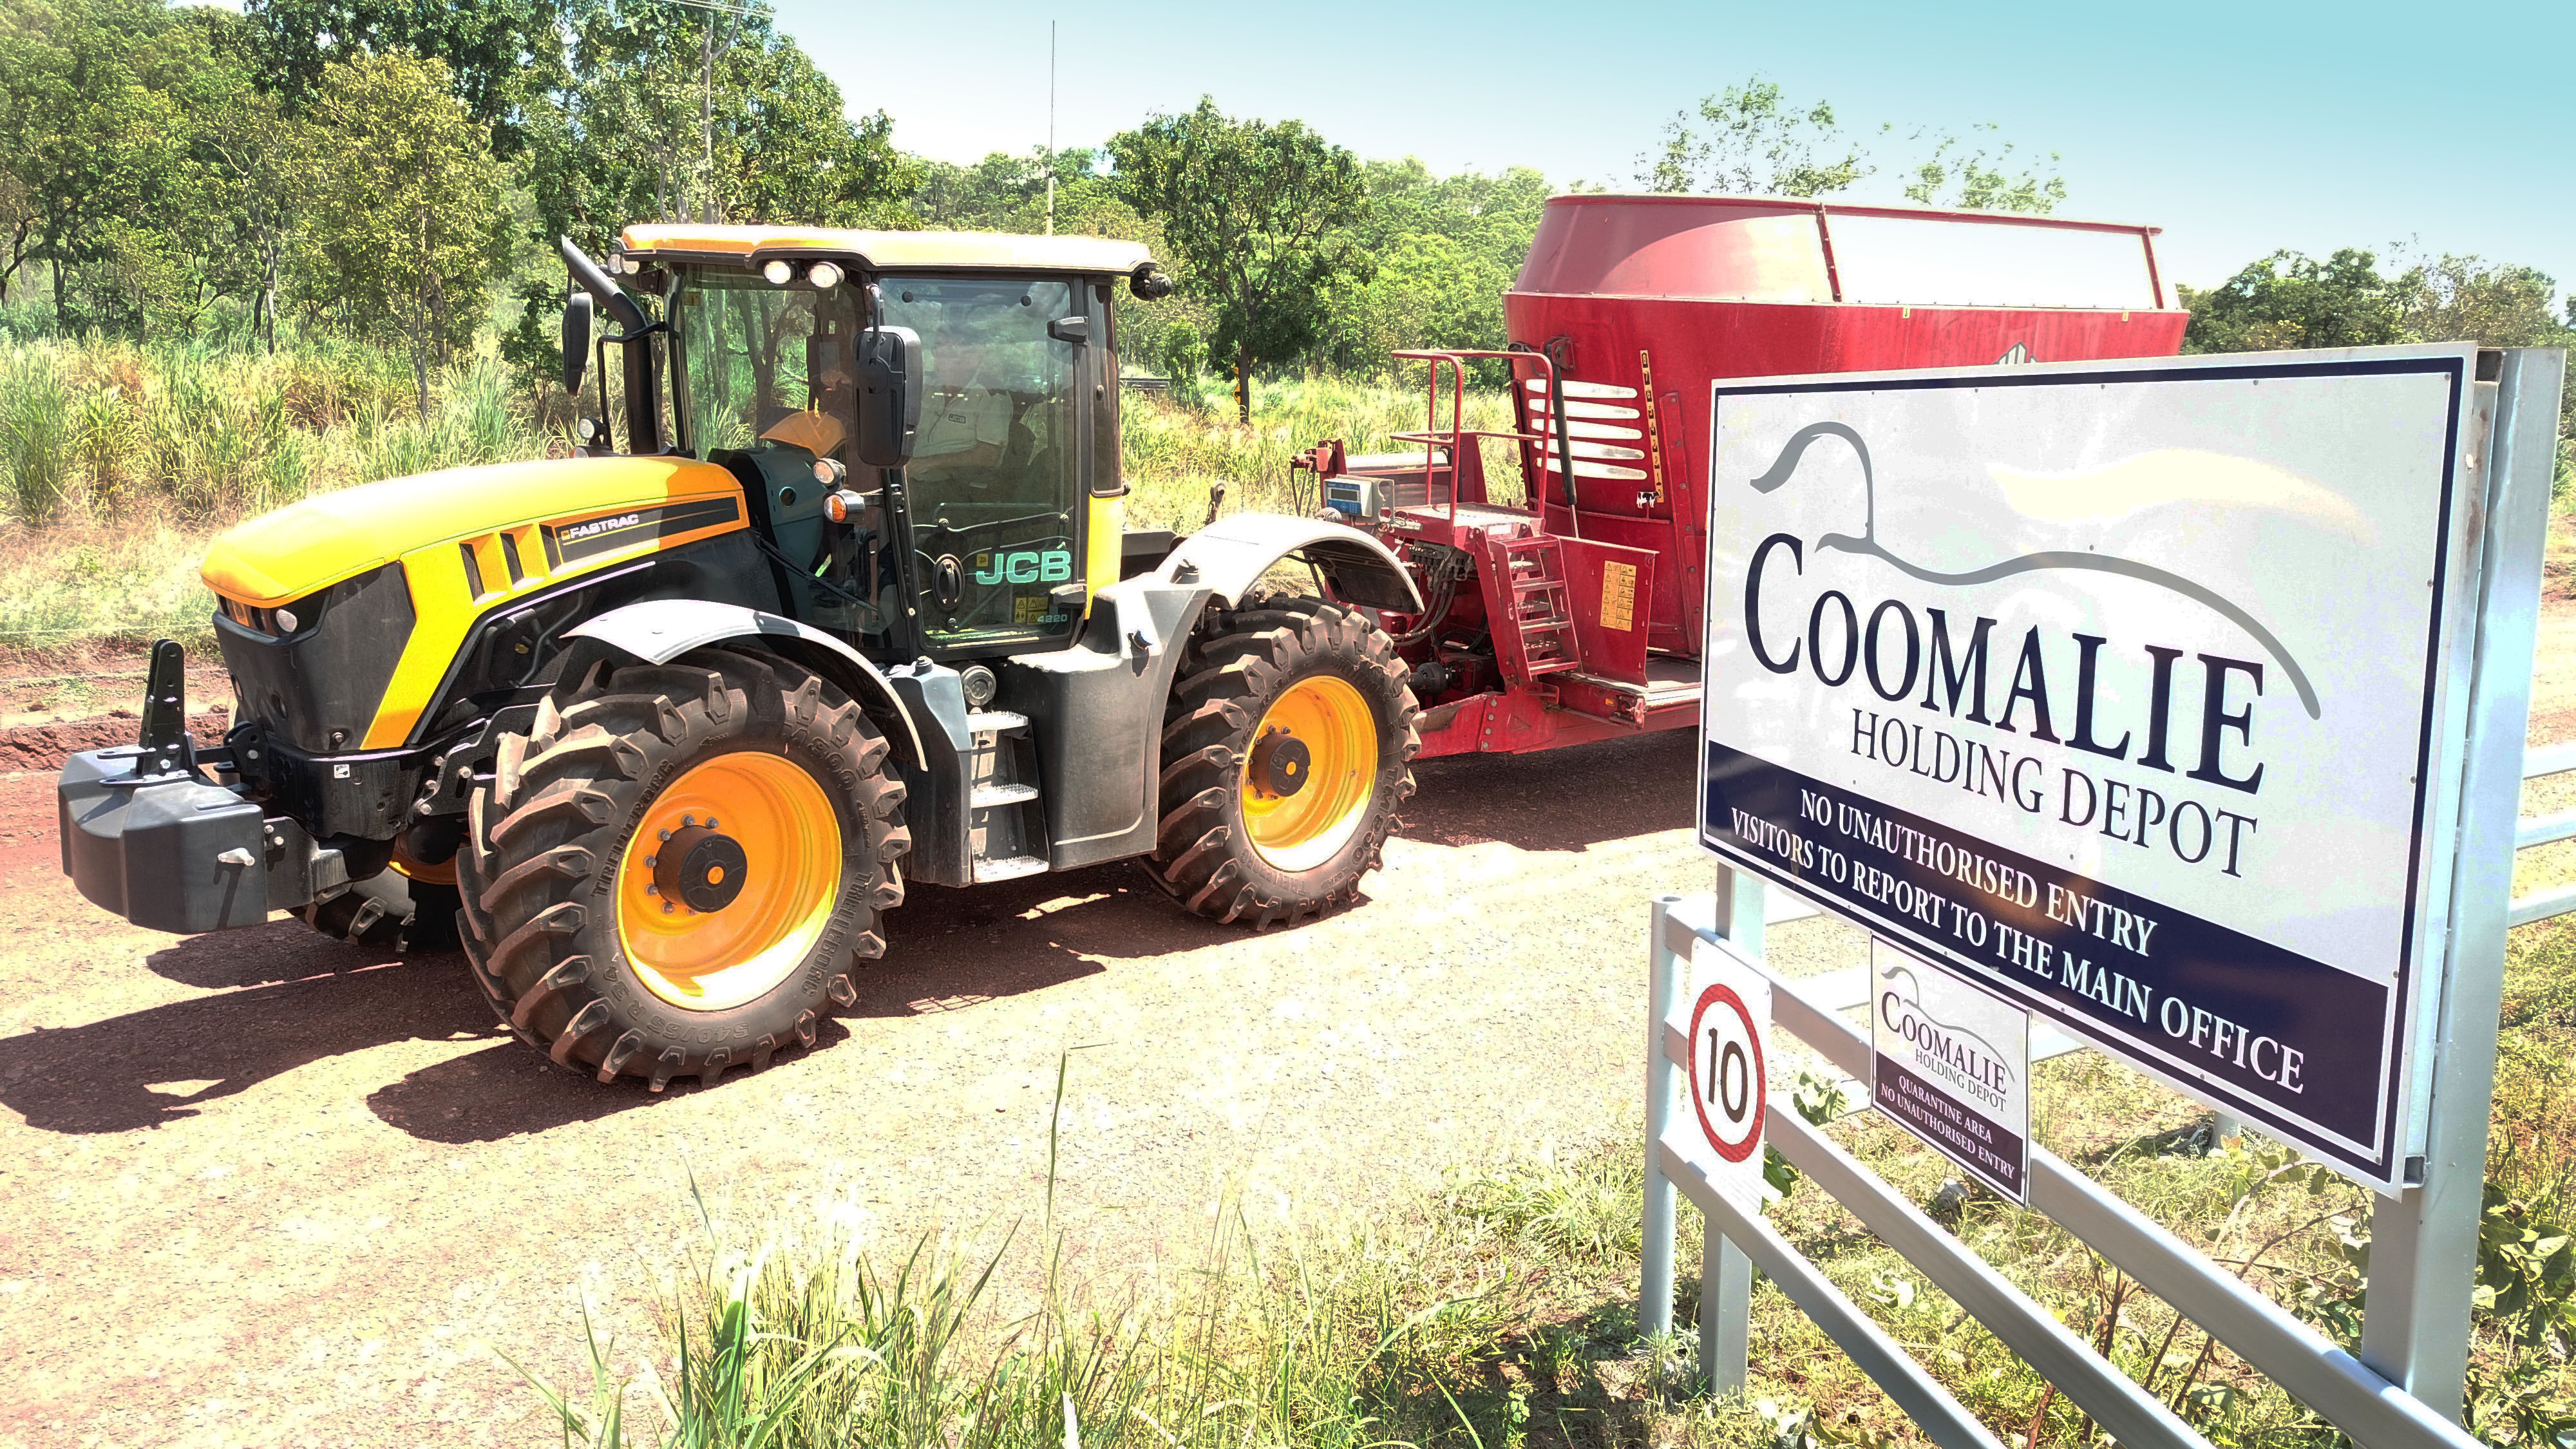 Coomalie Holding Depot